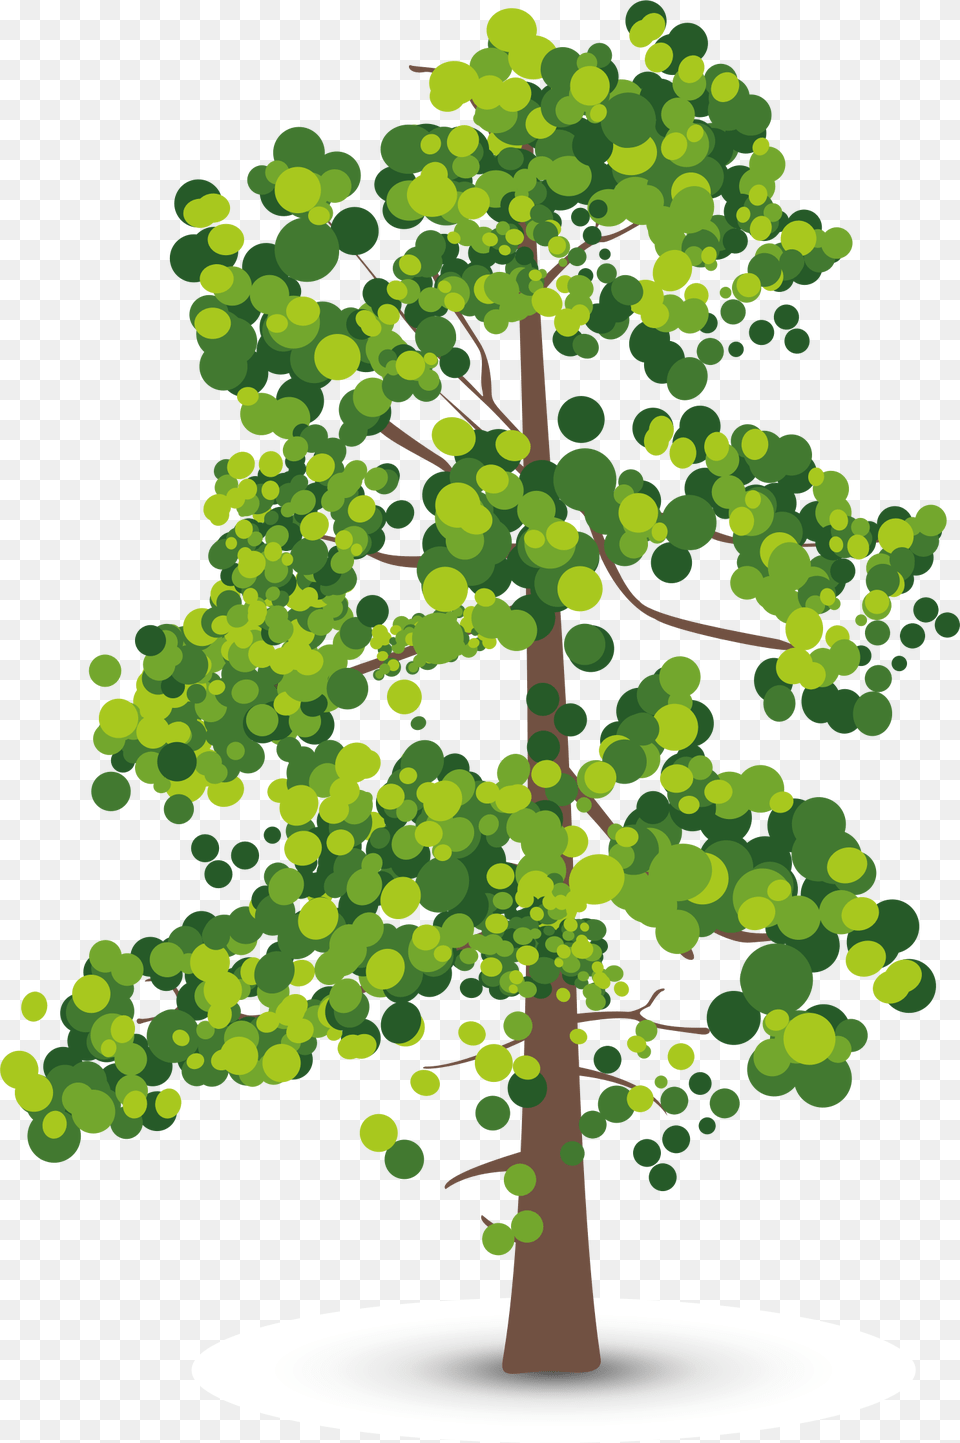 Aspen Tree Creative Perspective Olive Leaf Shadow Clipart Lidar Number Of Returns, Green, Plant, Oak, Sycamore Png Image